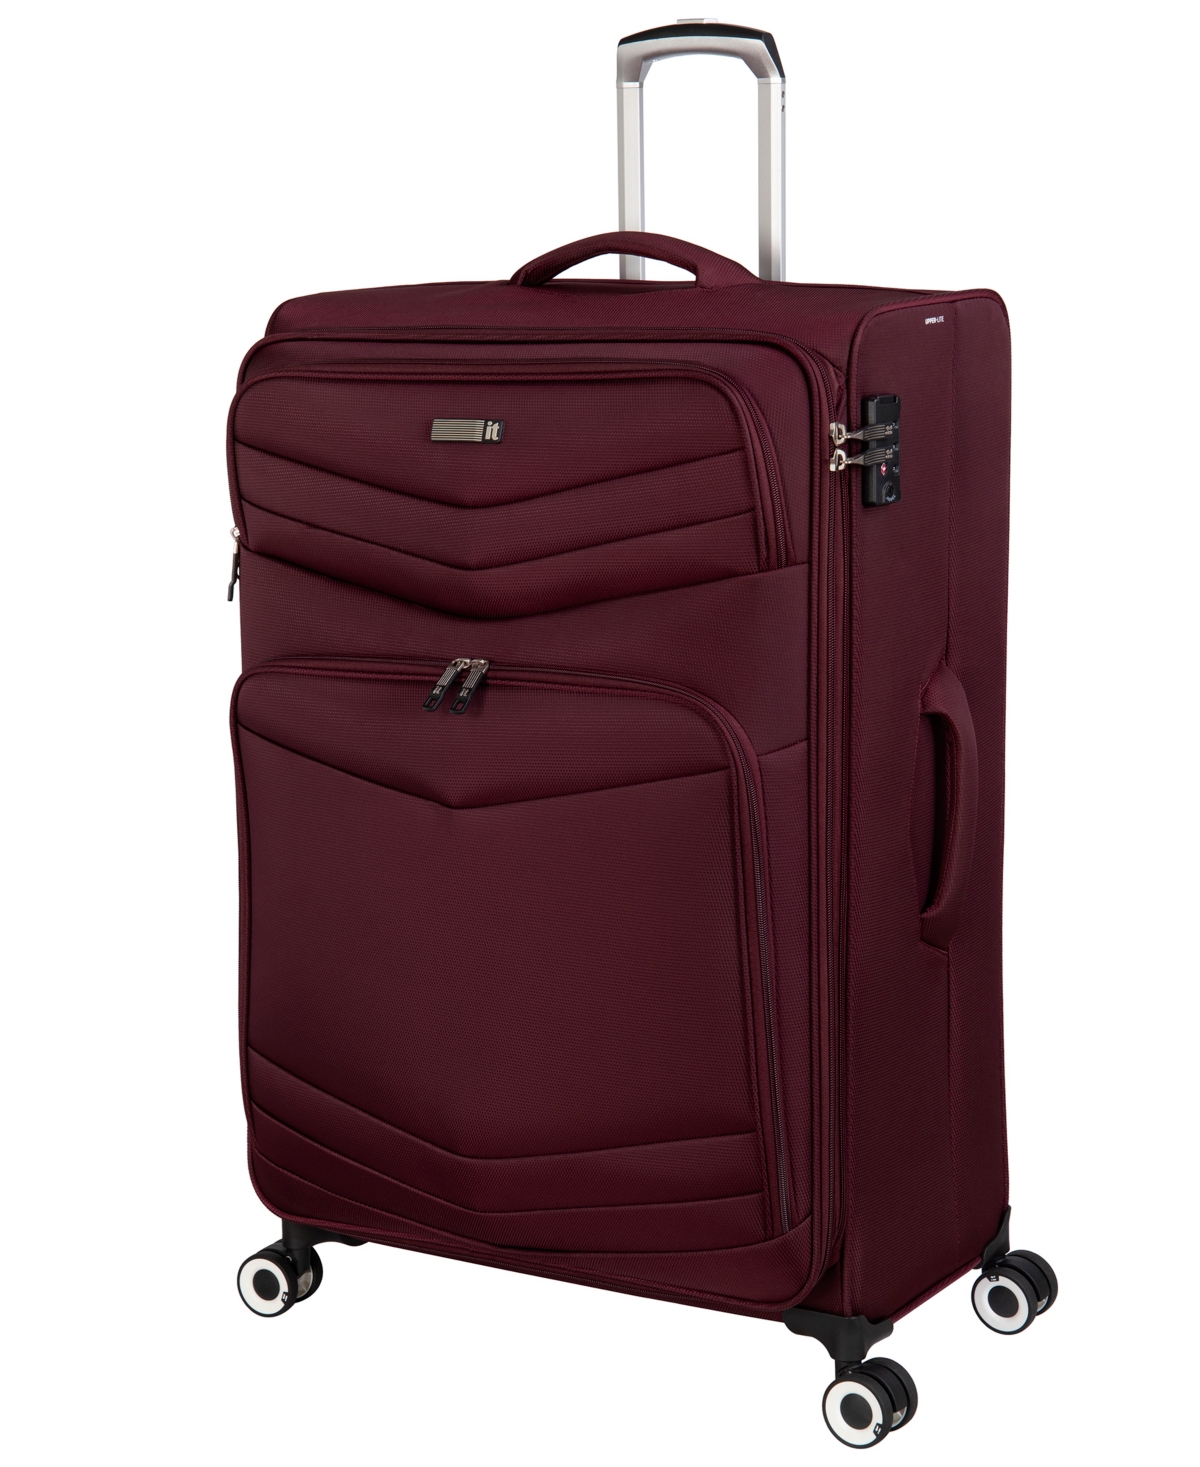 Shop It Luggage Intrepid 20" 8-wheel Expandable Carry-on Luggage Case In Dark Red